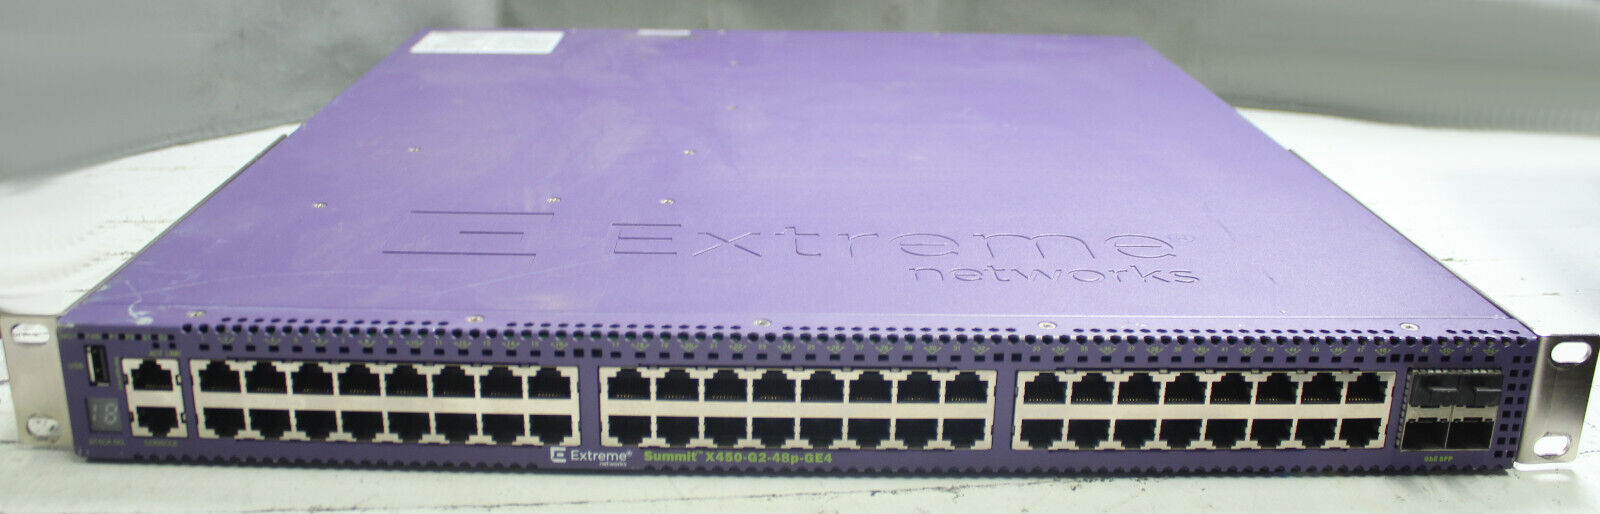 Extreme 16175 X450-G2-48p-GE4-Base Switch - AS IS- NO FANS, NO PSU